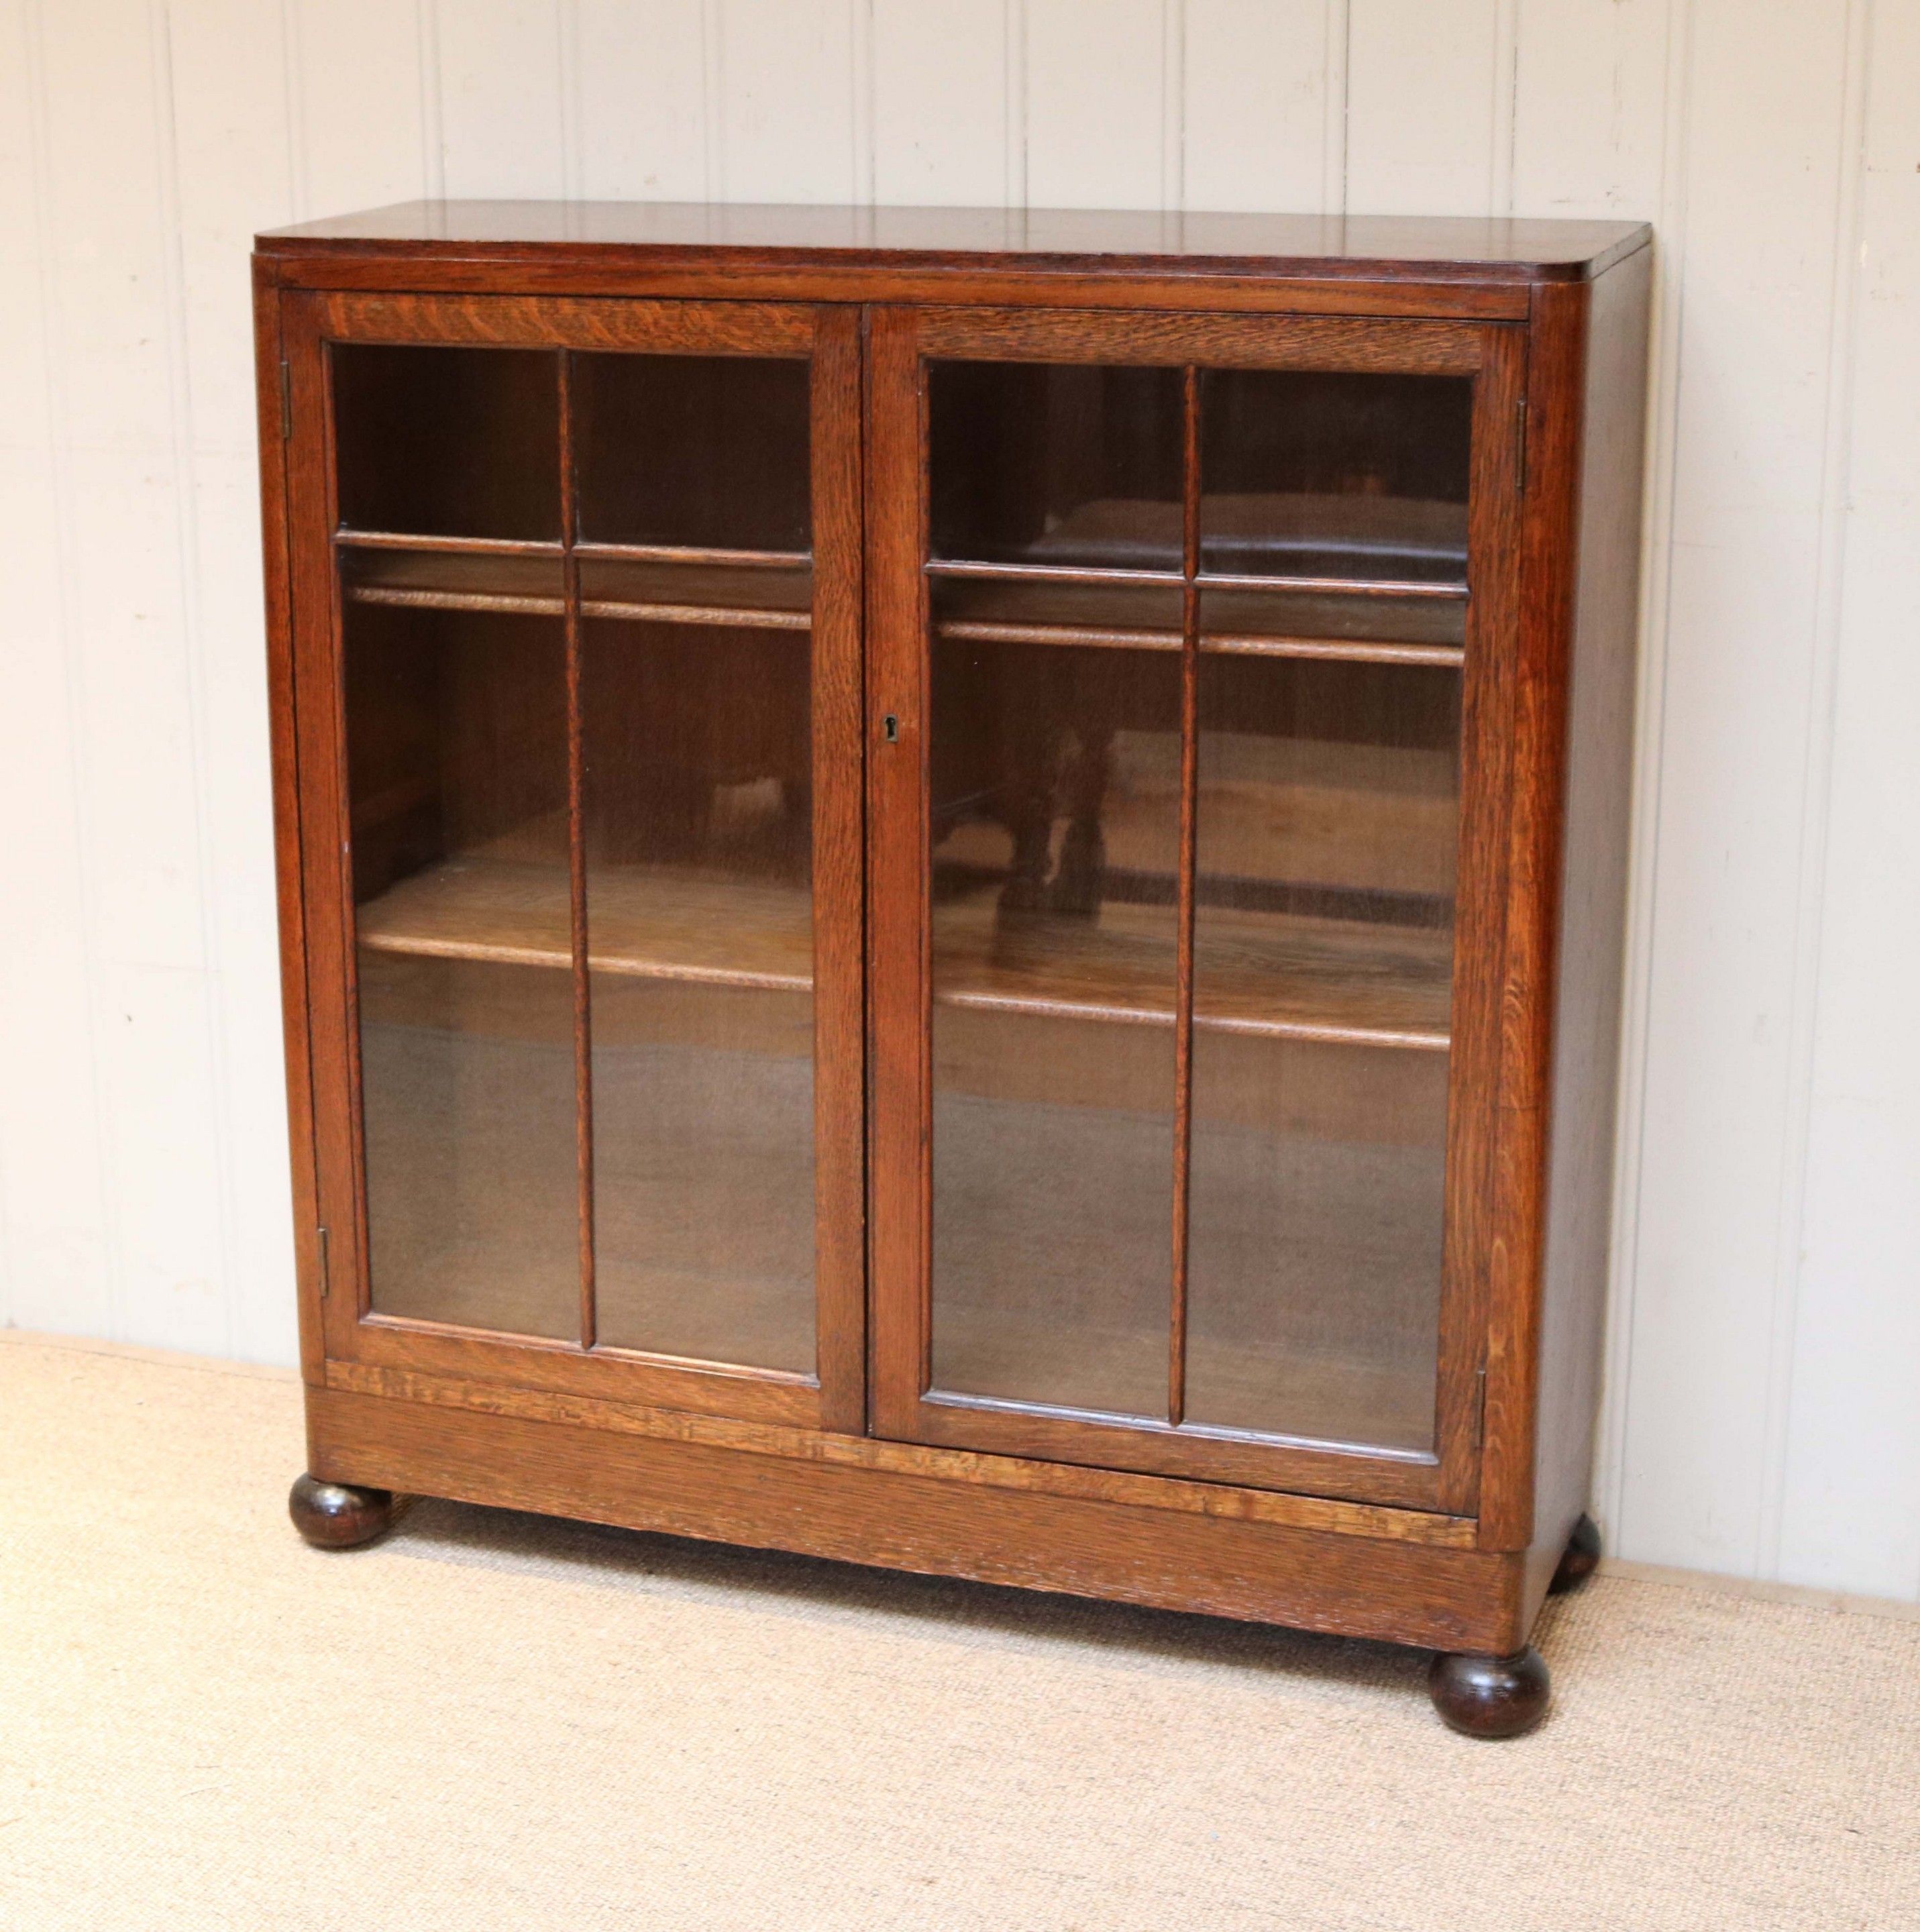 Oak Glazed Bookcase C 1920 English From Worboys Antiques The Throughout Oak Glazed Bookcase (View 9 of 15)